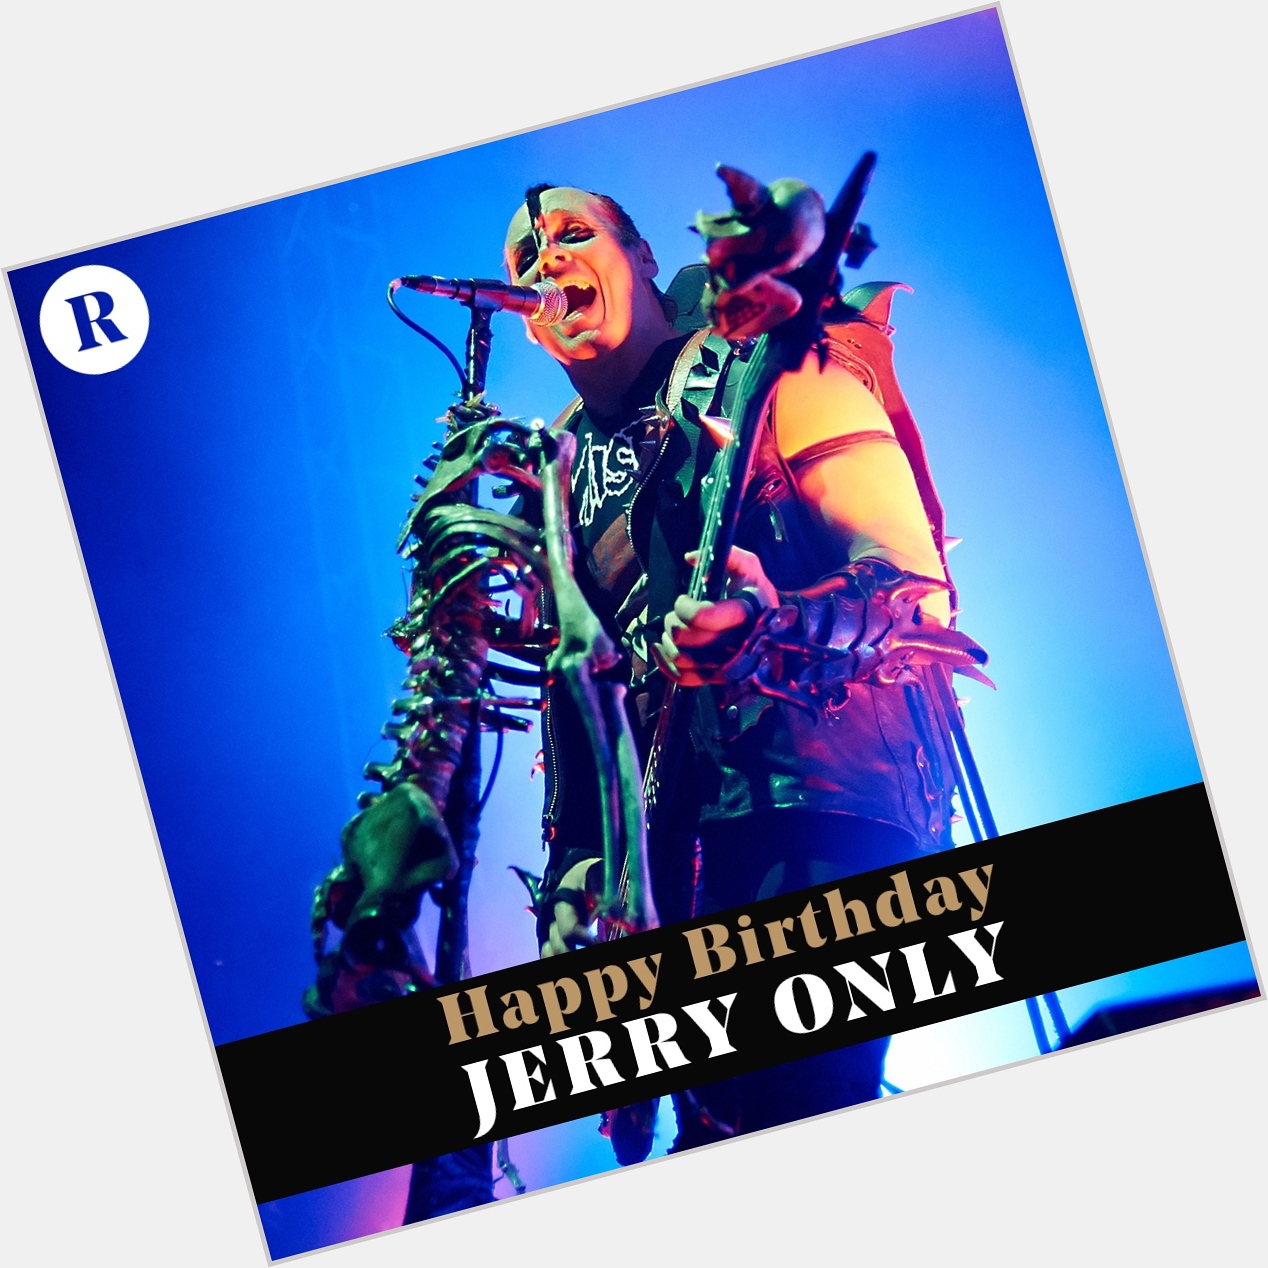   Happy birthday, Jerry Only! What\s your favorite song? 